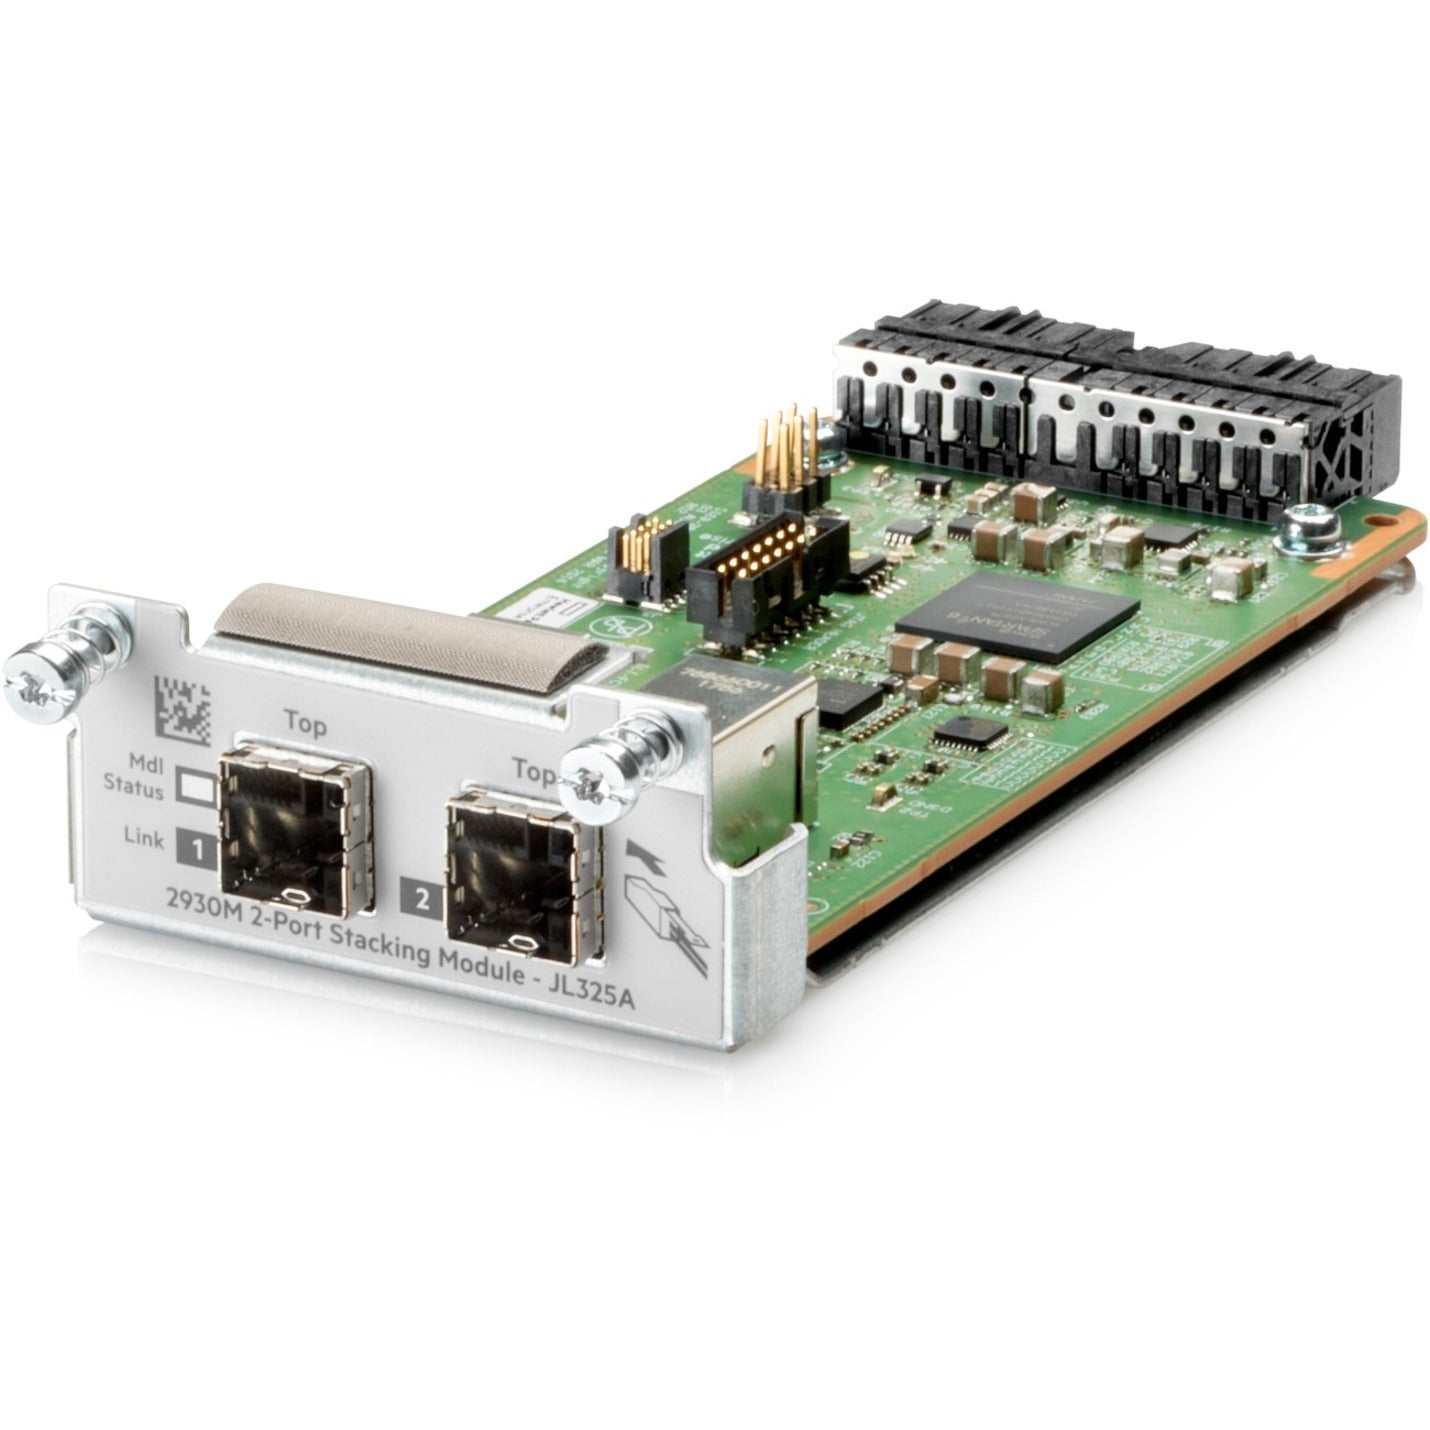 Aruba JL325A 2930 2-Port Stacking Module, Expand Your Network Effortlessly